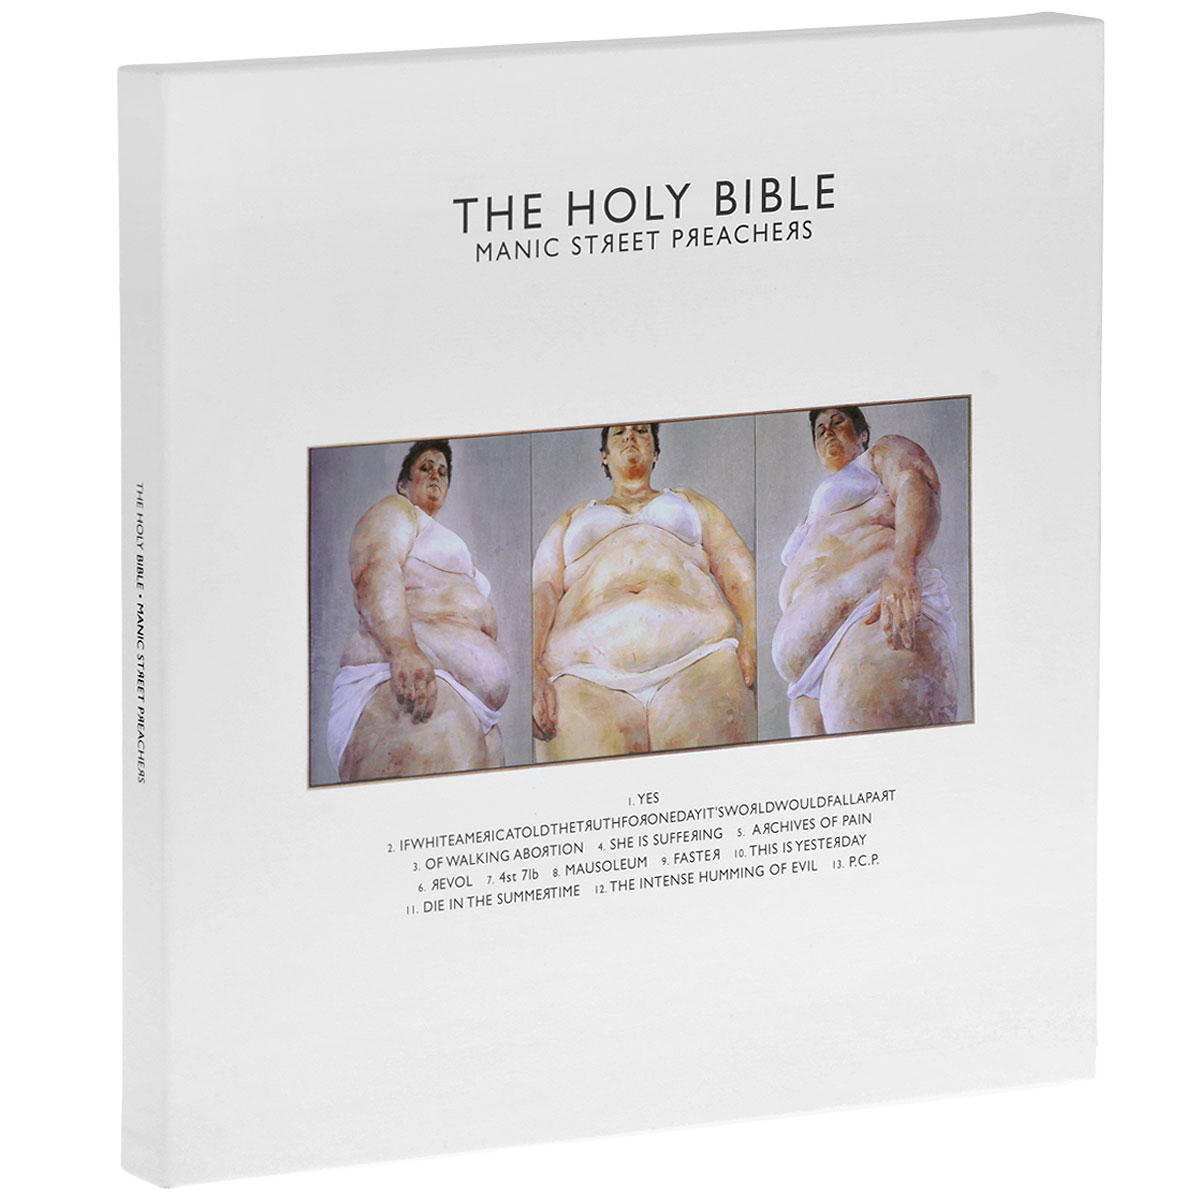 Manic Street Preachers. The Holy Bible. Limited 20th Anniversary Edition (4 CD)